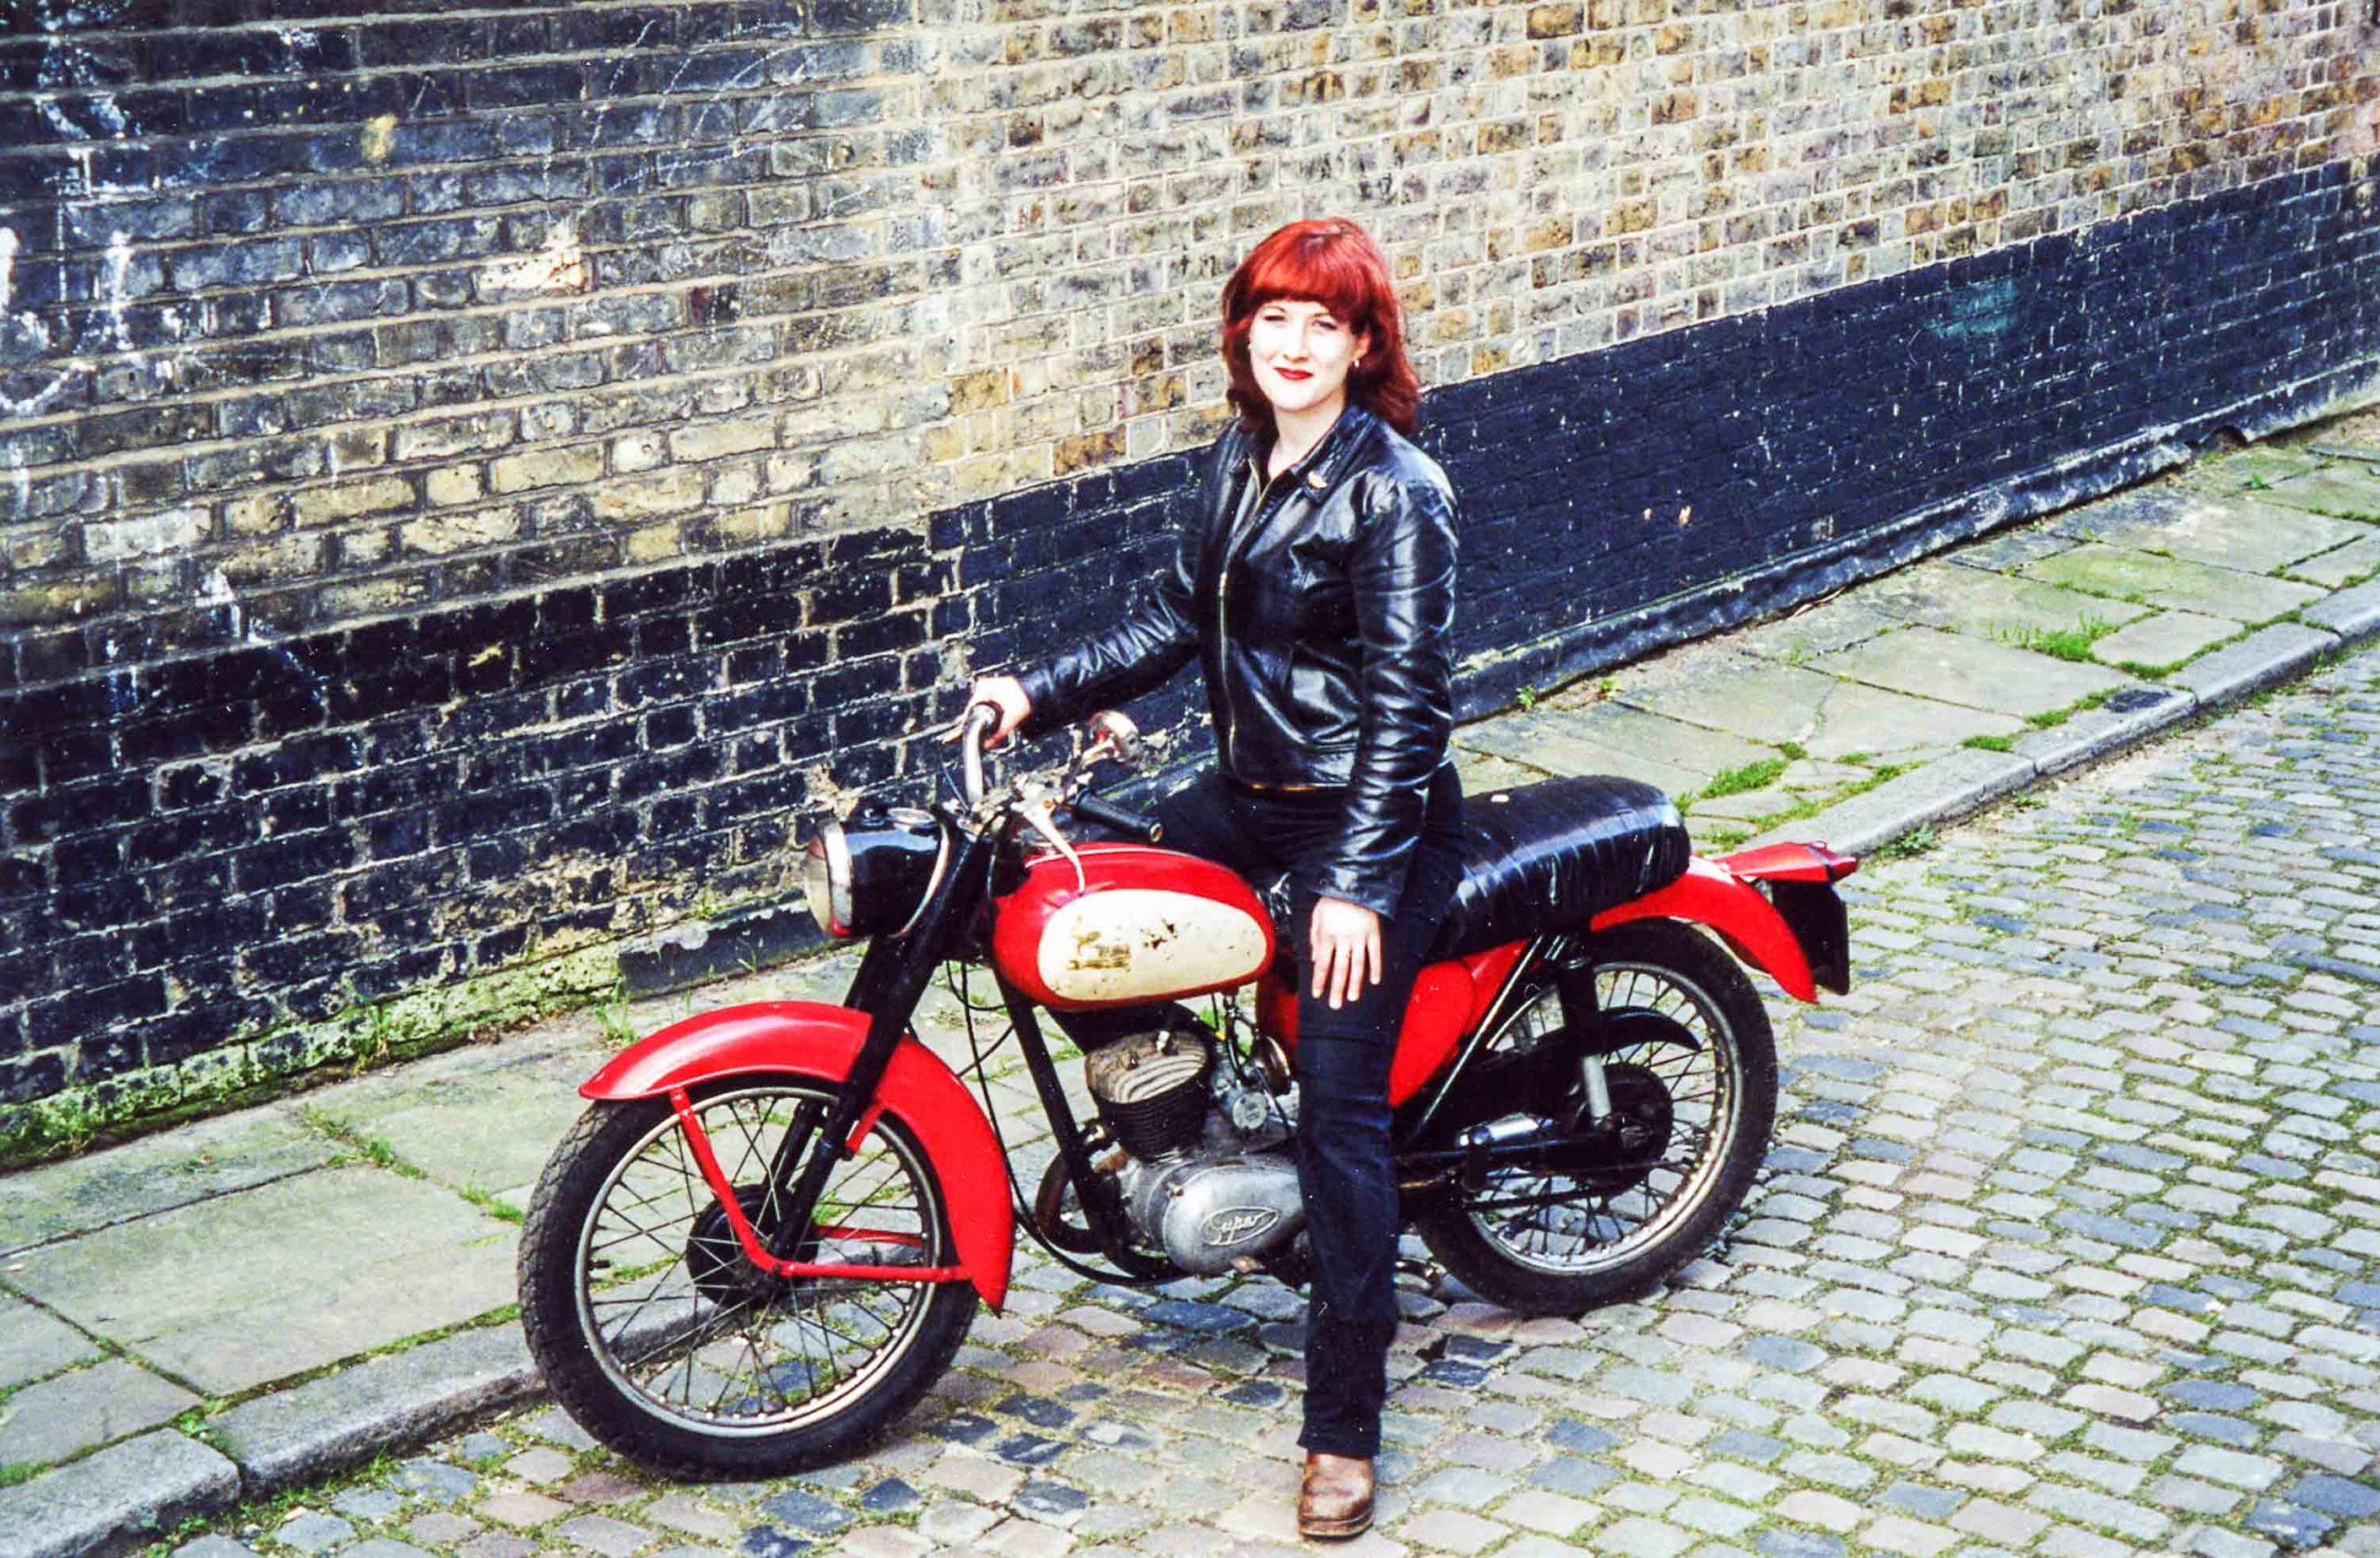 Lois Pryce astride red motorcycle on city street